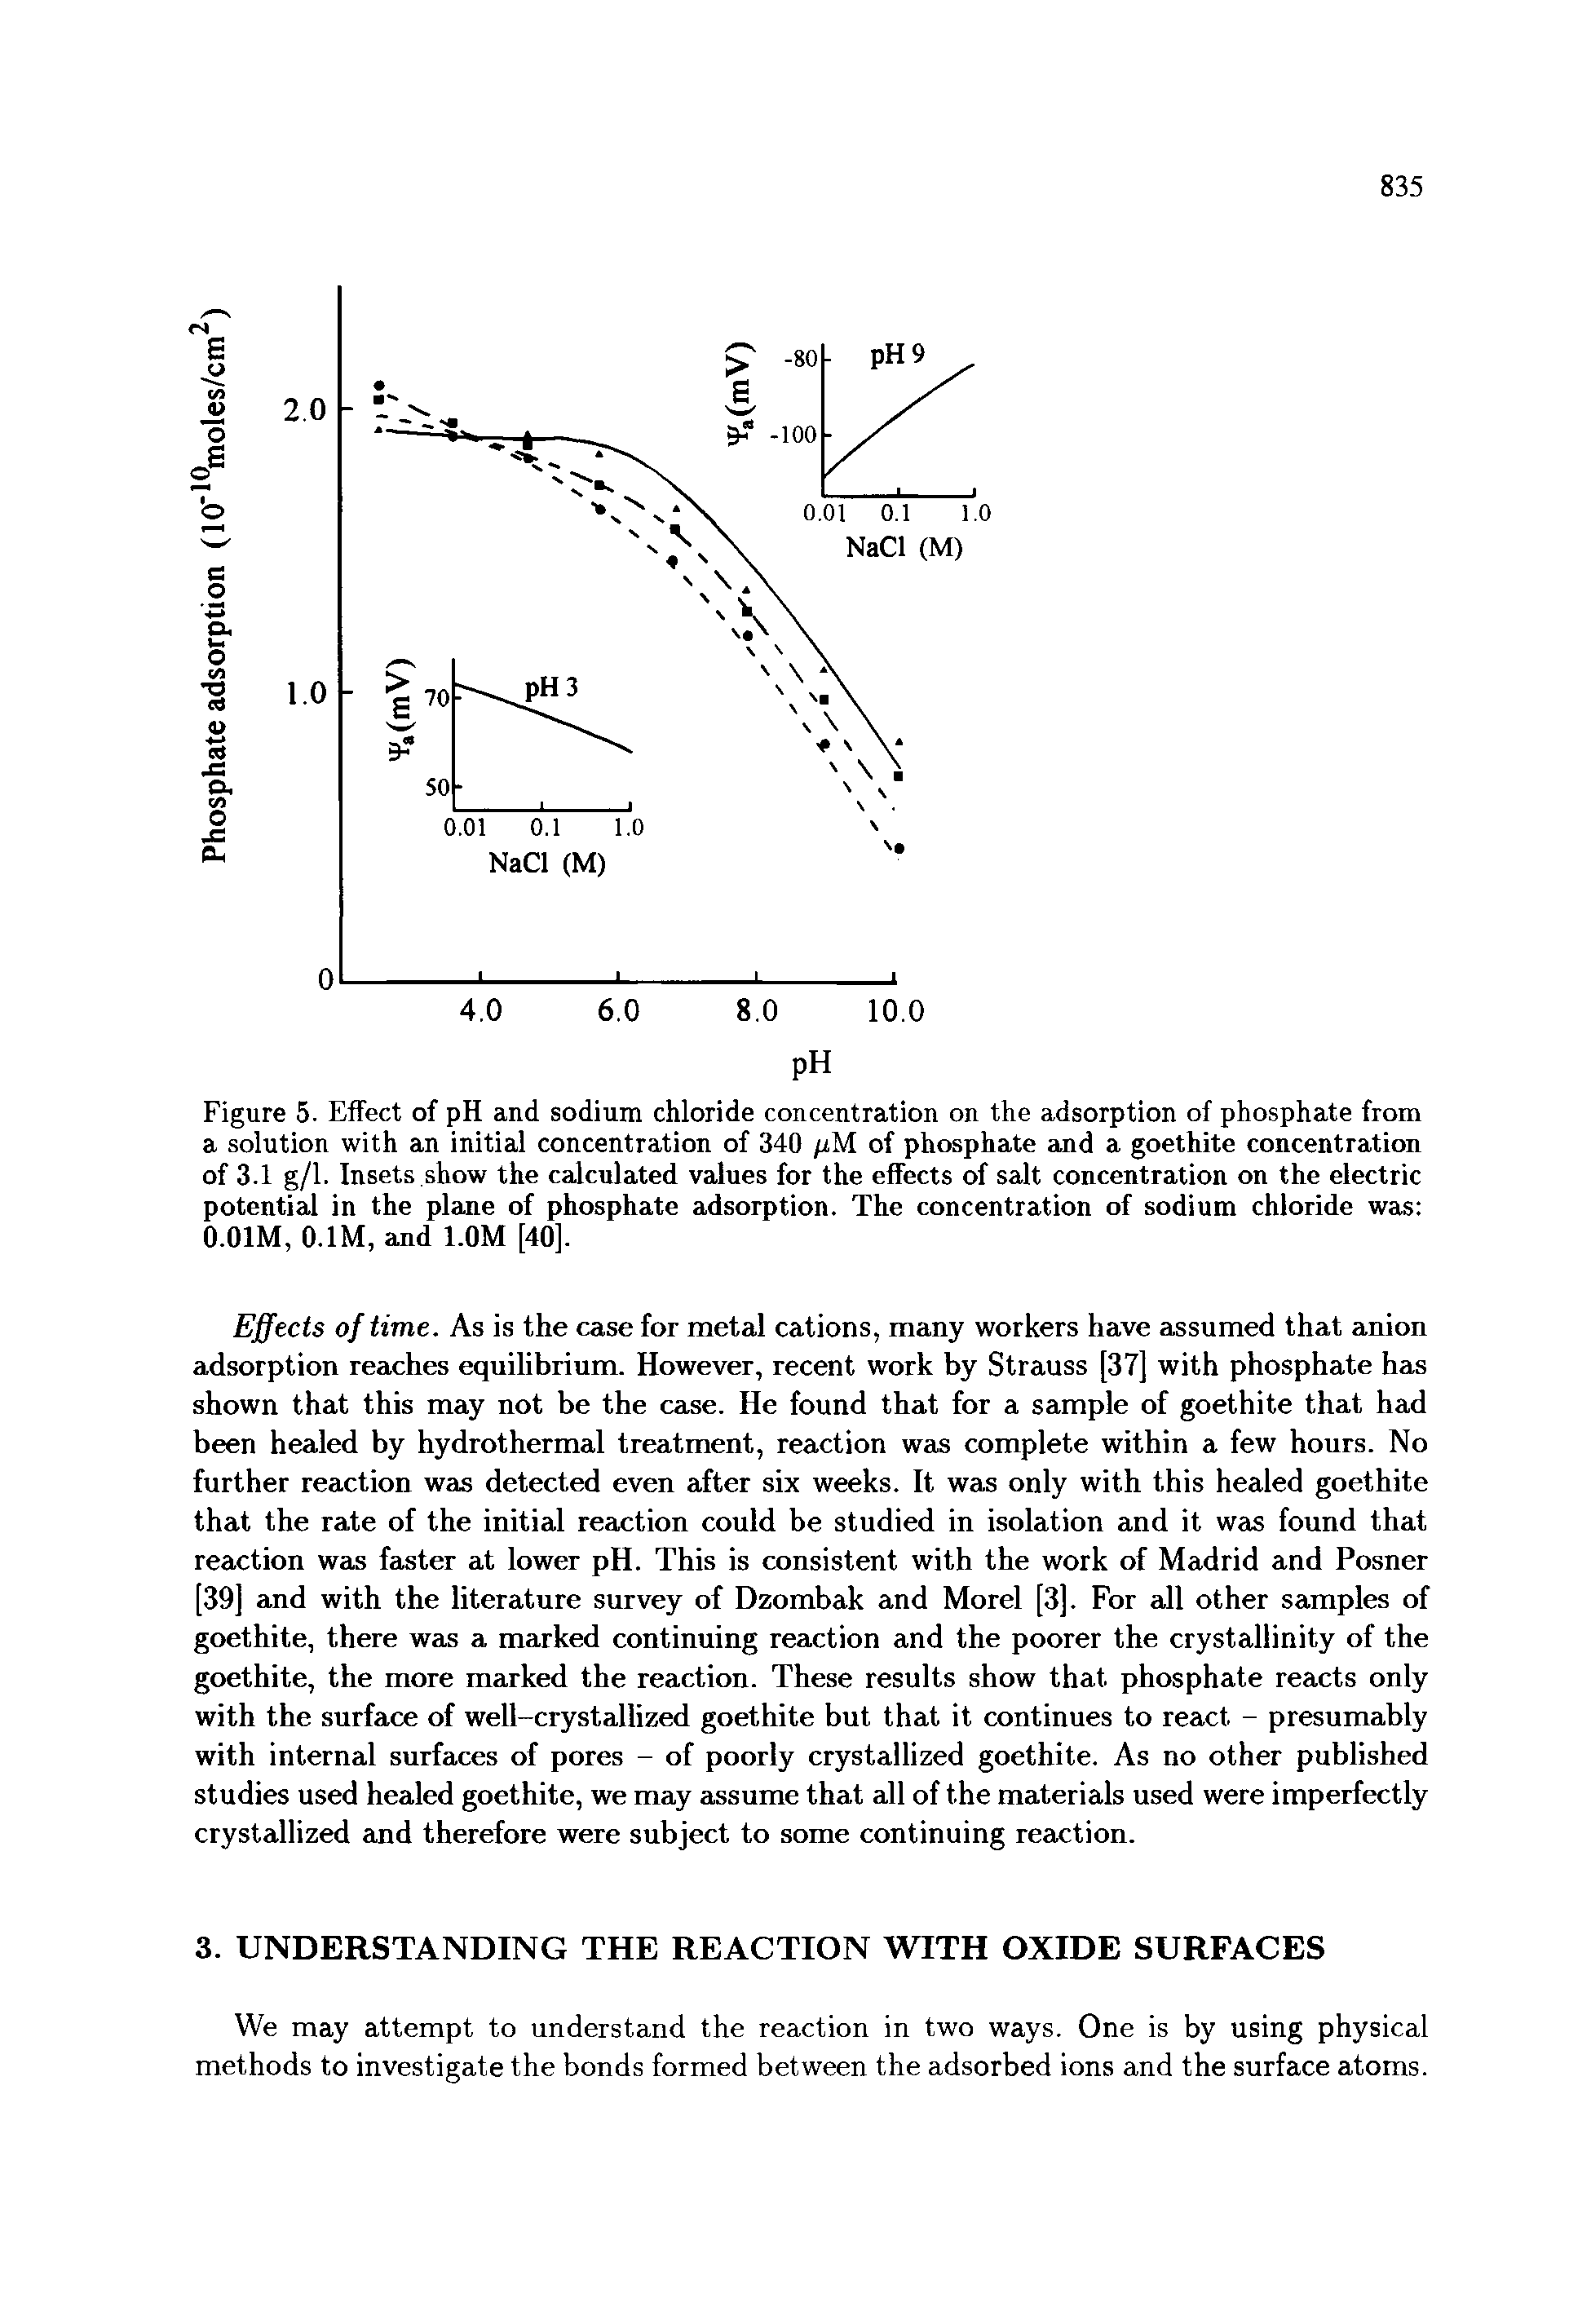 Figure 5. Effect of pH and sodium chloride concentration on the adsorption of phosphate from a solution with an initial concentration of 340 (jM of phosphate and a goethite concentration of 3.1 g/1. Insets show the calculated values for the effects of salt concentration on the electric potential in the plane of phosphate adsorption. The concentration of sodium chloride was O.OIM, O.IM, and l.OM [40].